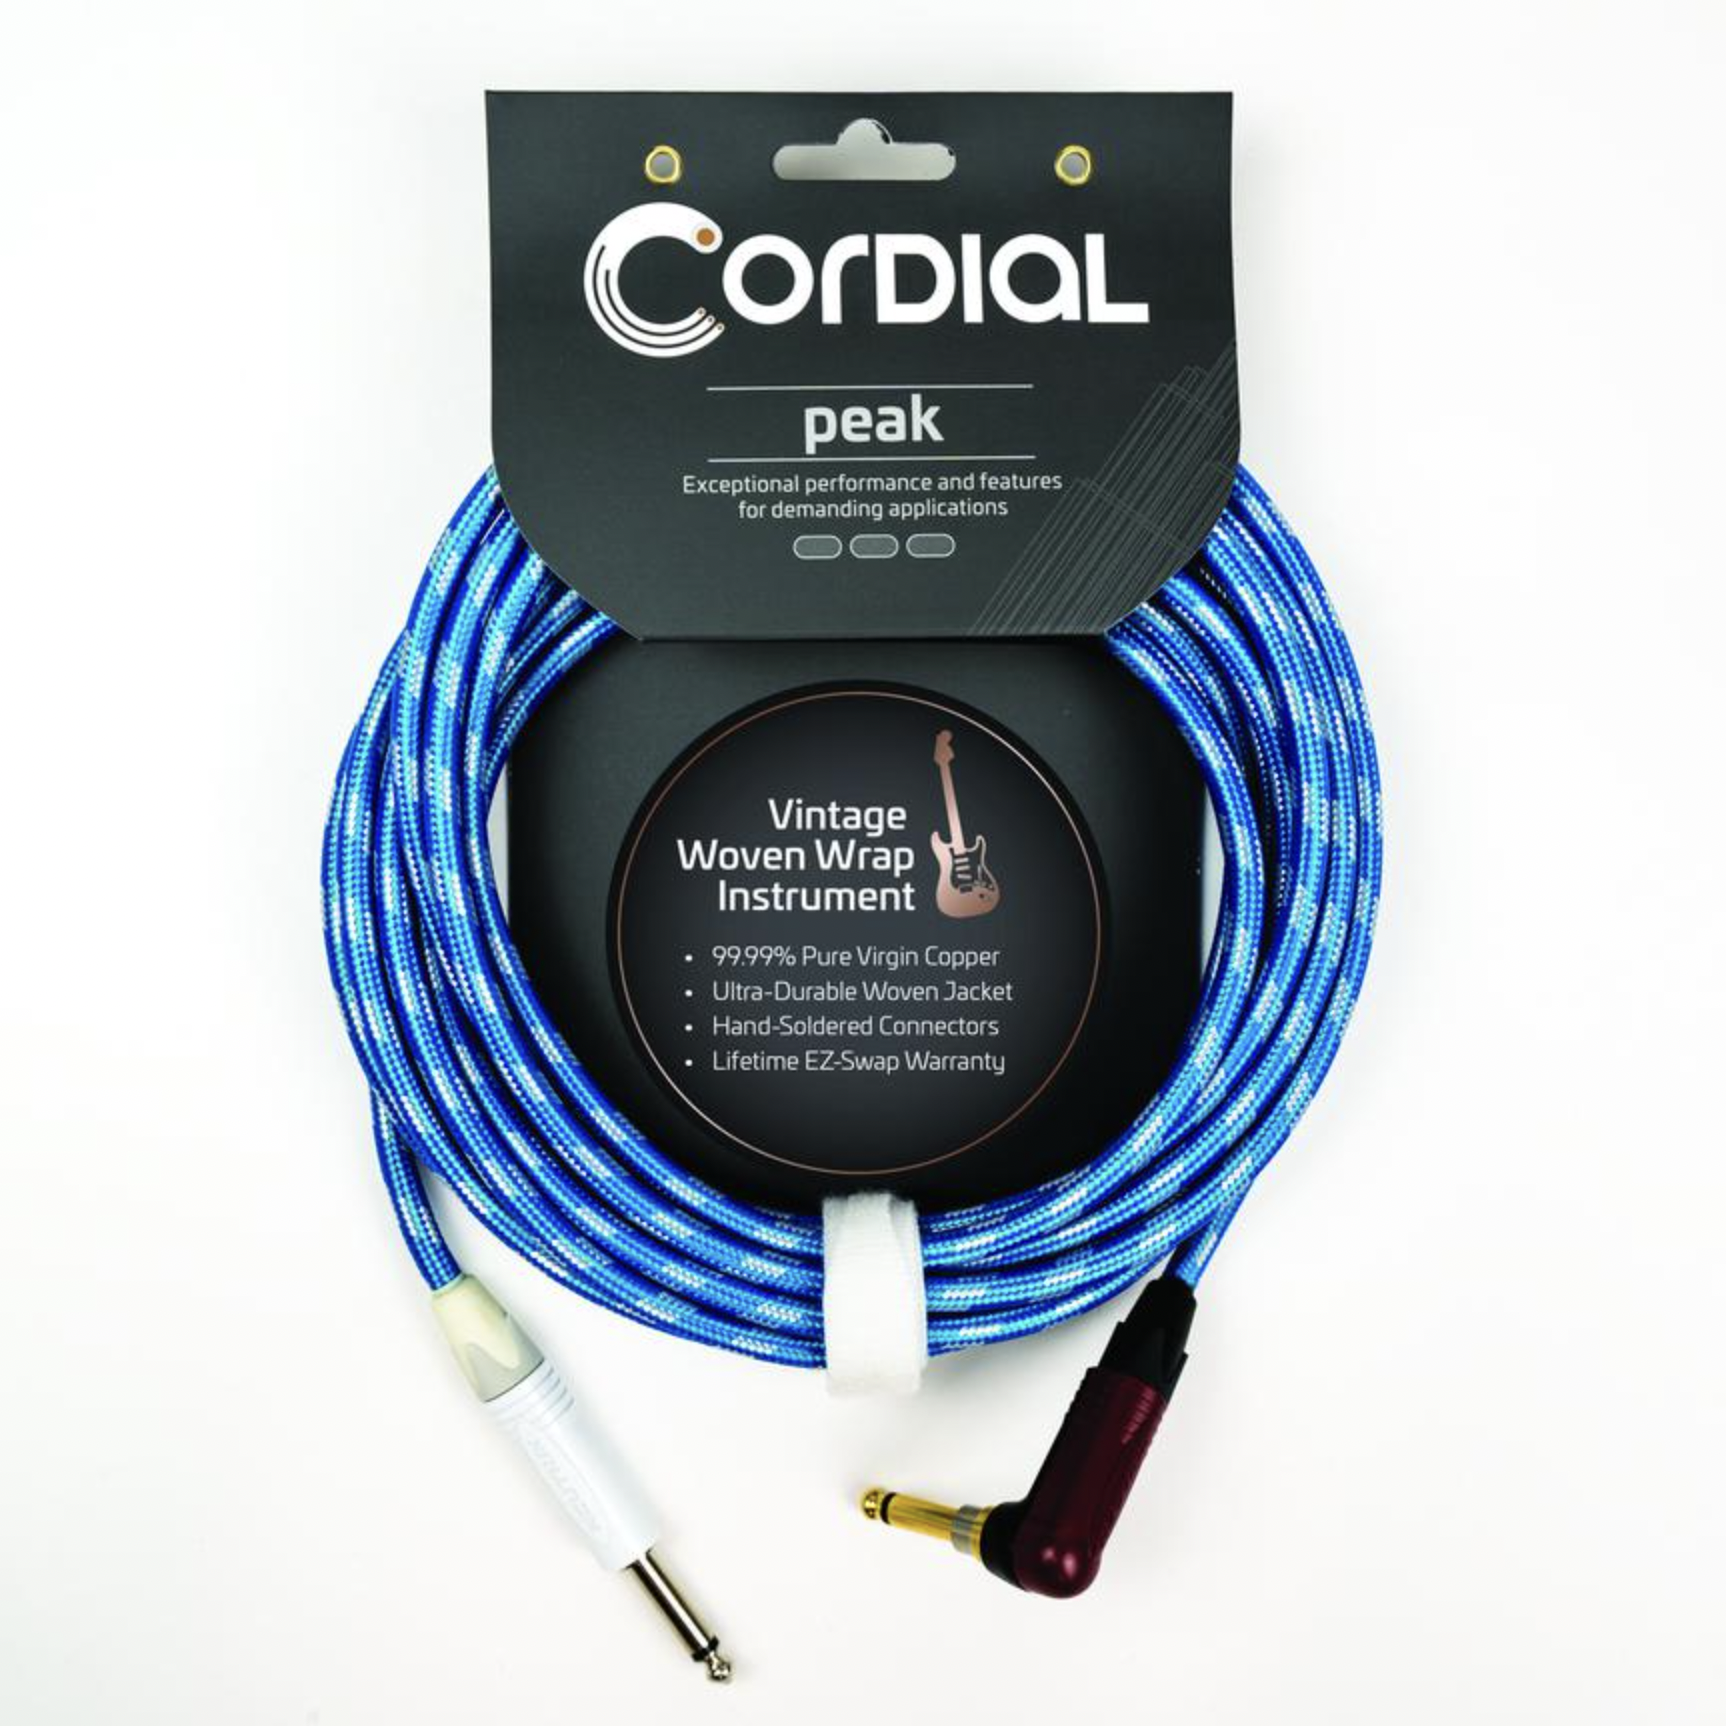 Cordial Cables Premium Instrument White/Blue Sky Textile Cable with Neutrik Silent Plug, Peak Series - 30-Foot Cable, 1/4" Straight to 1/4" Right-Angle Phone Plugs, No-Fray Sleeve